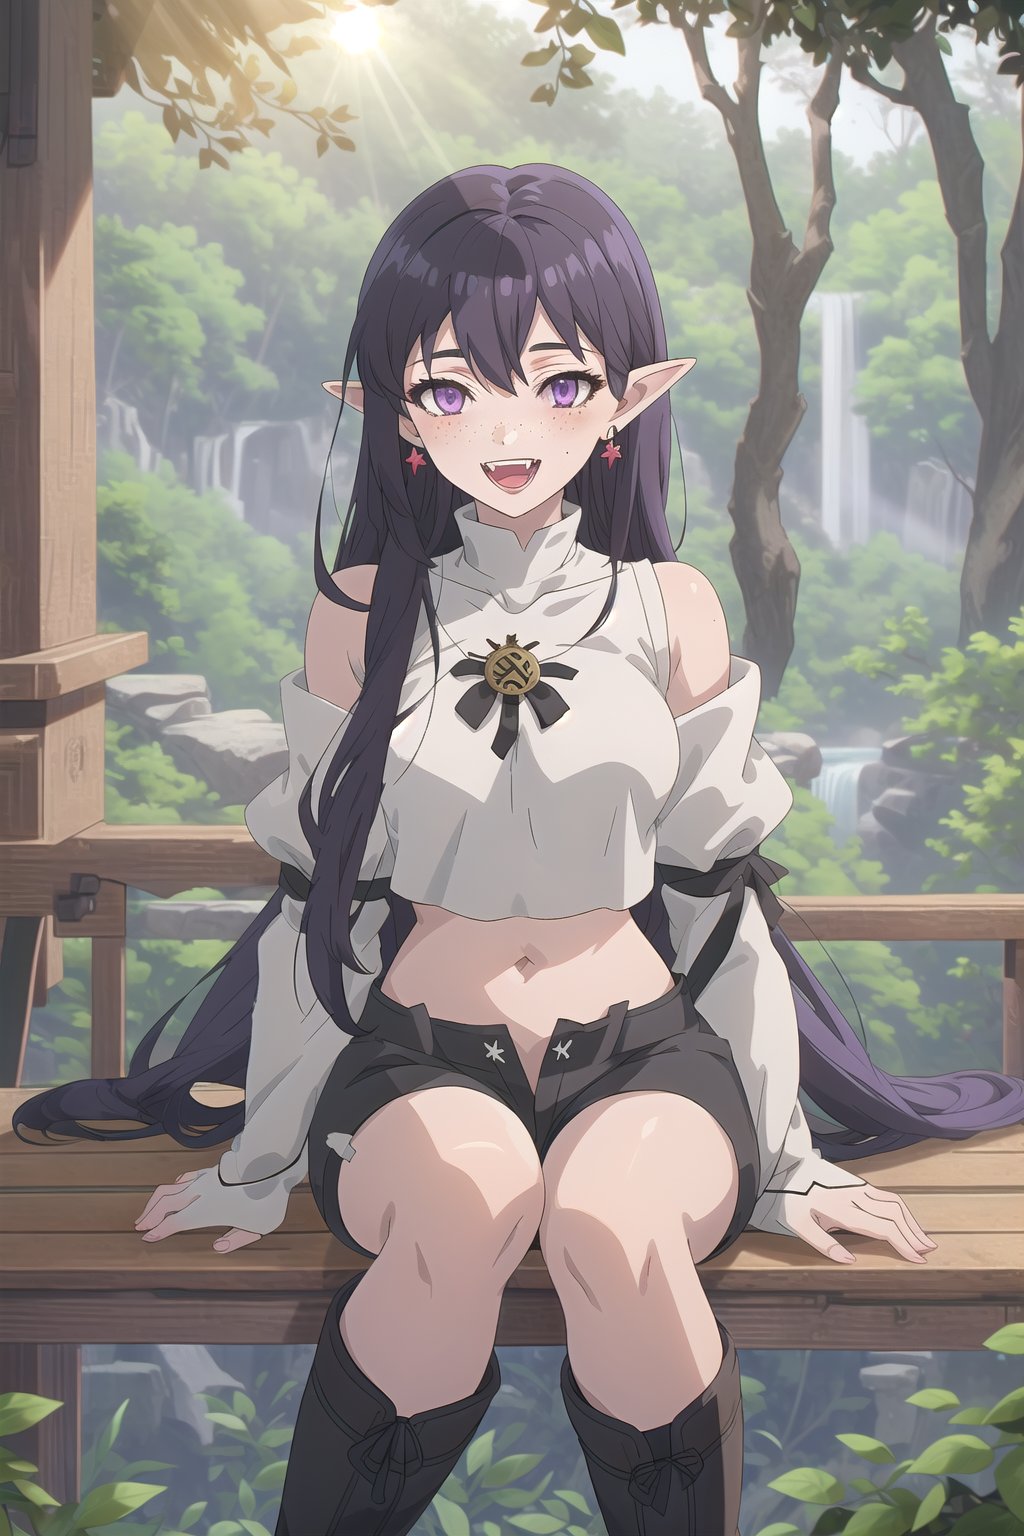 nier anime style illustration, best quality, masterpiece High resolution, good detail, bright colors, HDR, 4K. Dolby vision high. 

Archer elf girl with long straight black hair (hair on shoulders), purple eyes, freckles, blushing, purple earrings

Dark brown medieval fantasy style crop top

Showing navel, exposed navel 

Medieval fantasy dark brown shorts 

Elegant black medieval fantasy style boots 

apple tree forest 

Sunrise 

Intense sun rays between the trees

waterfalls in the distance

Flirty smile (Yandere smile). Happy, excited. Open mouth

Showing fangs, exposed fangs

Selfie,nier anime style

Sitting,nier anime style

Black hair 